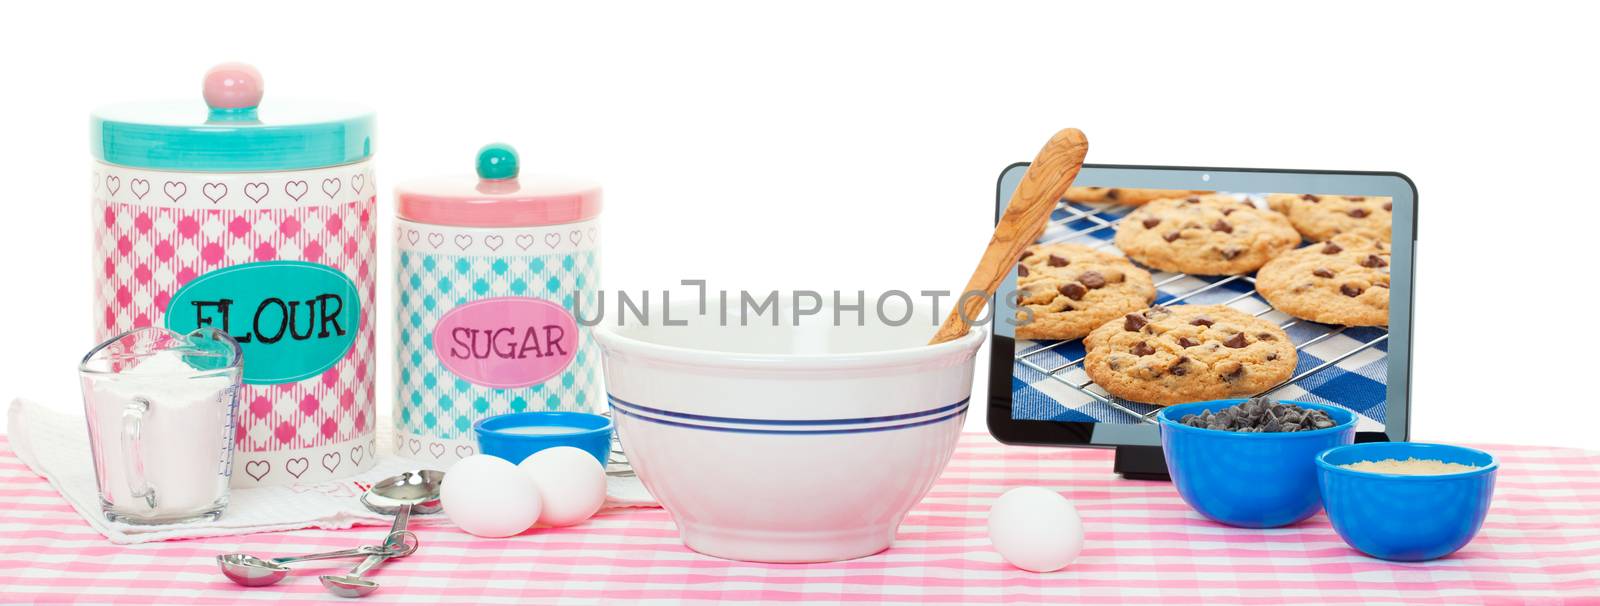 Baking using a tablet with recipe app & the internet.  Chocolate chip image on tablet is also available in my portfolio.